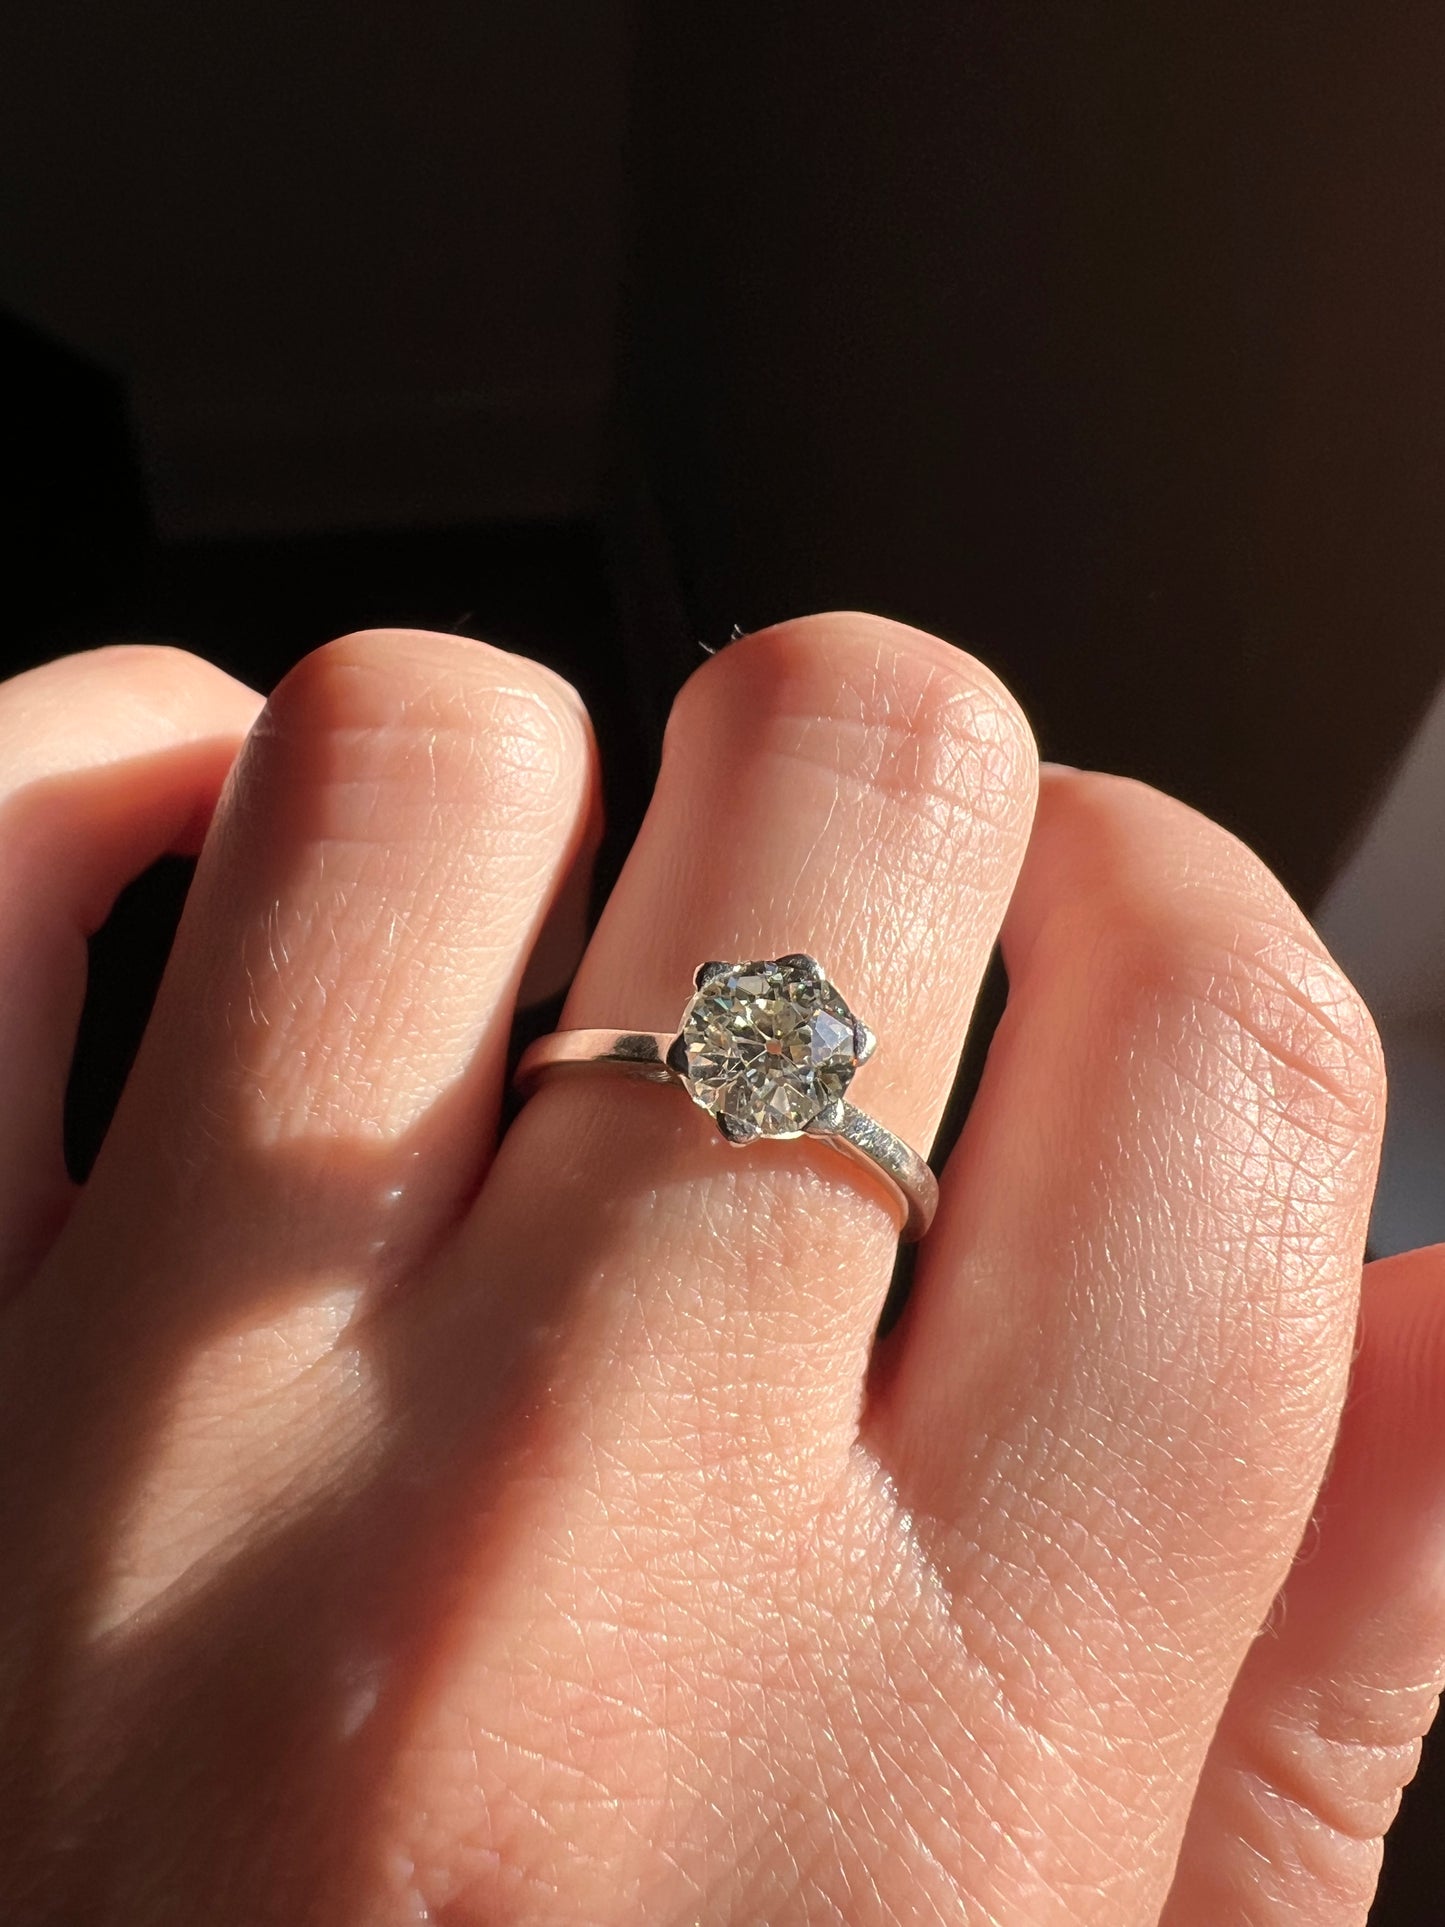 Antique 1 CARAT Old Mine Cut DIAMOND Solitaire Engagement Ring 18k White Gold PLATINUM French Art Deco Warm Very Pale Yellow Tall